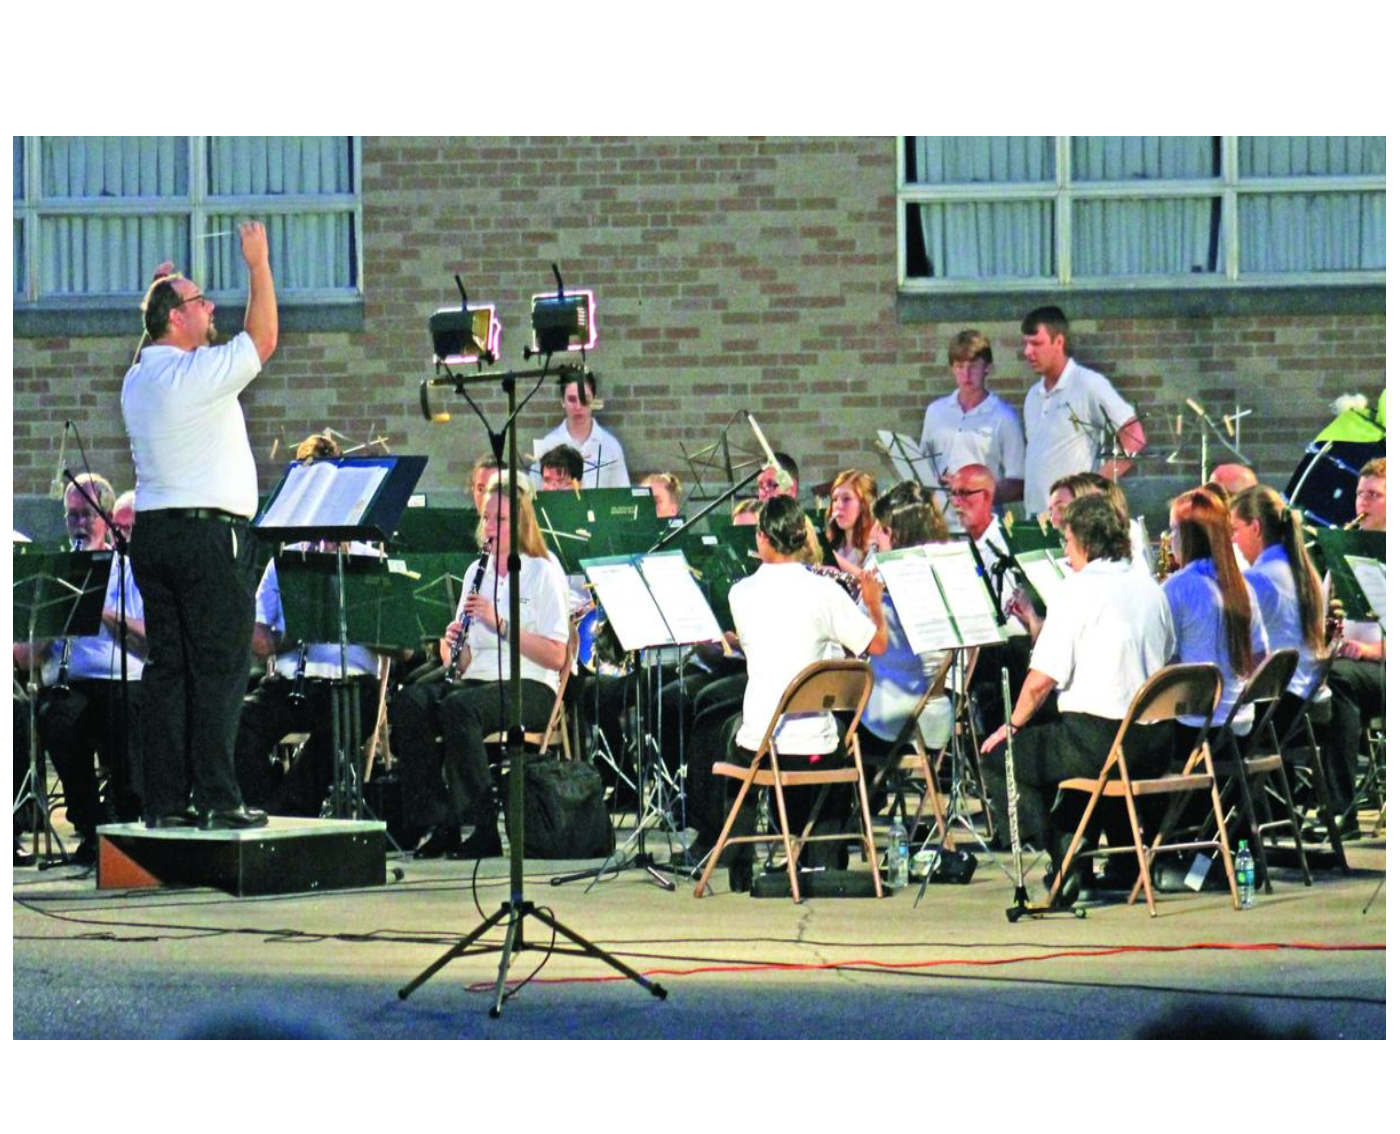 Ste. Genevieve Muny Band Concerts